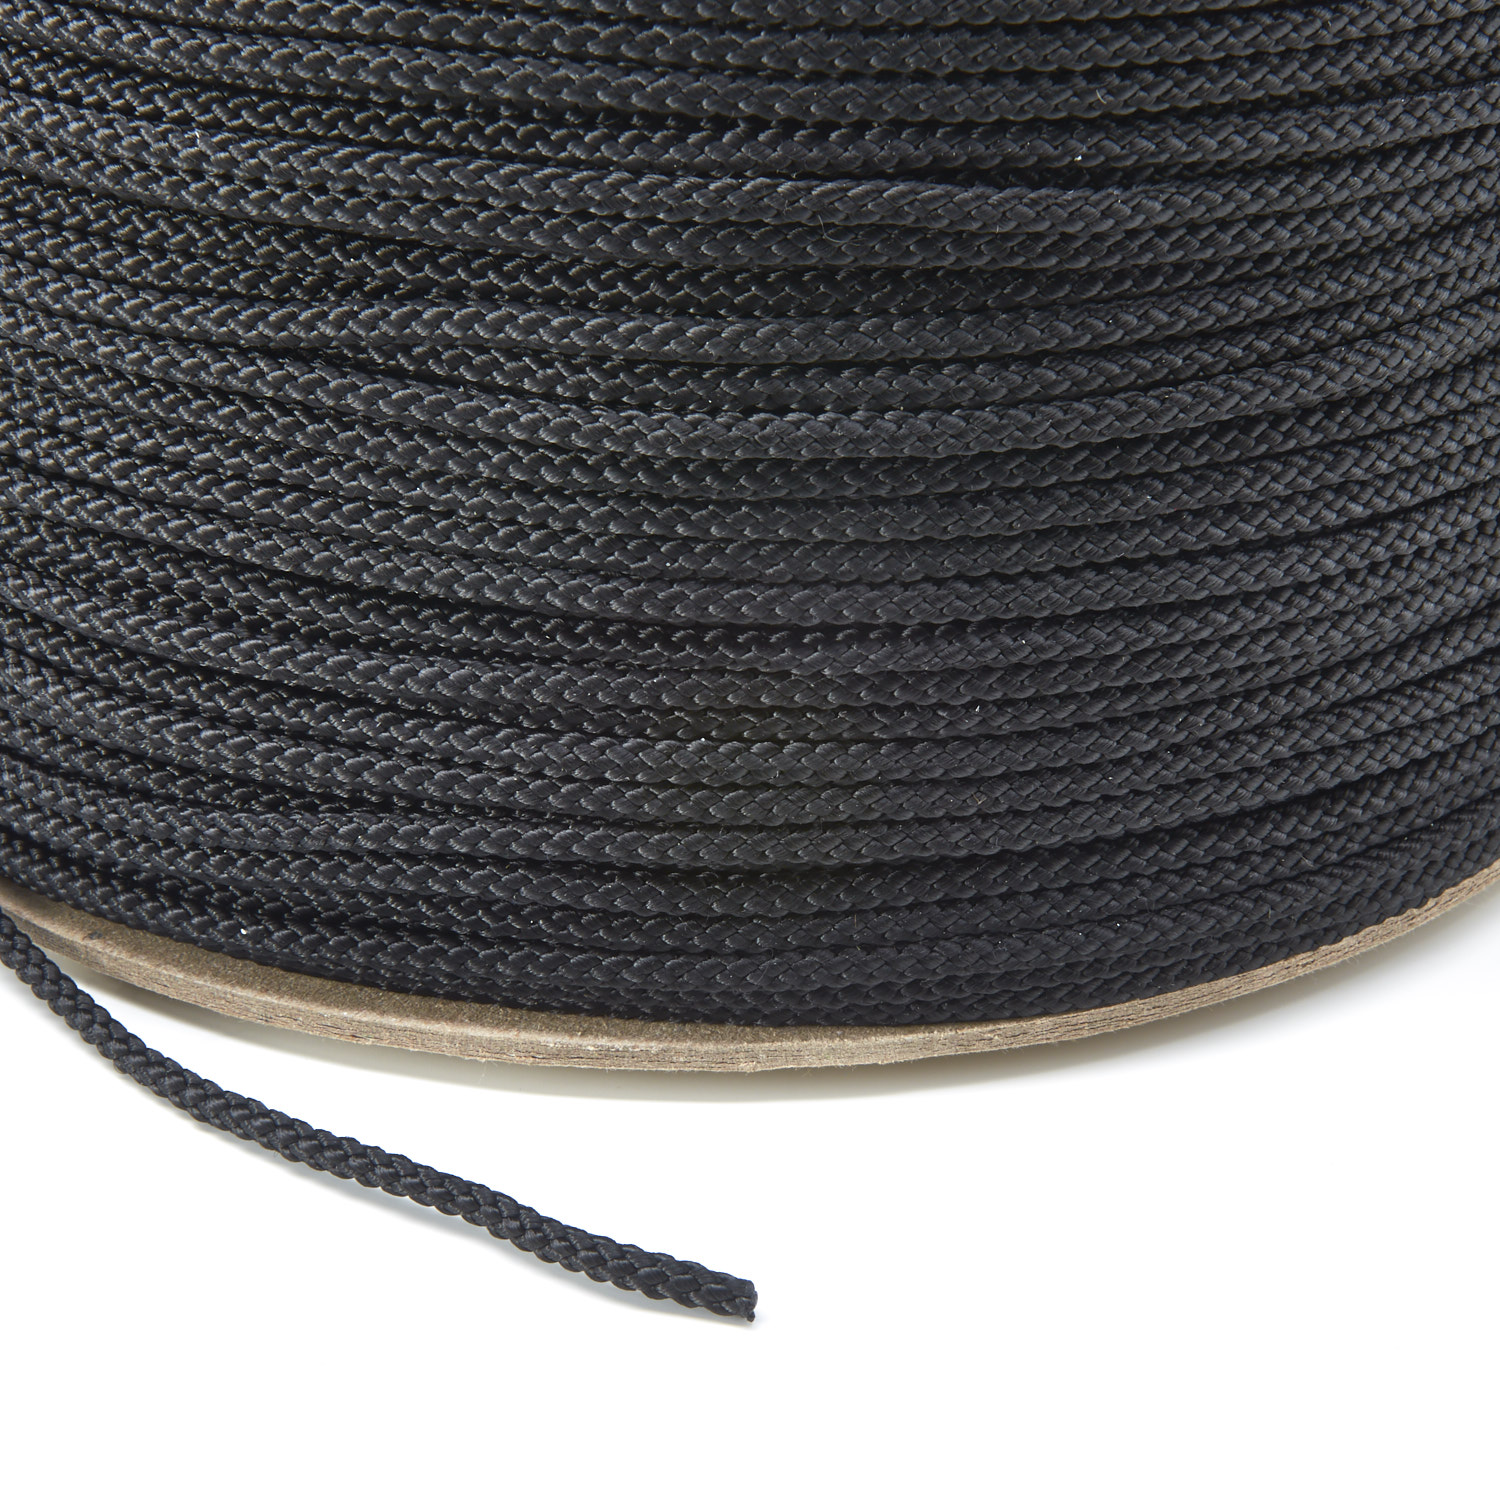 4mm Round Polypropylene Cord - Strong String - Poly Cord - UK Made